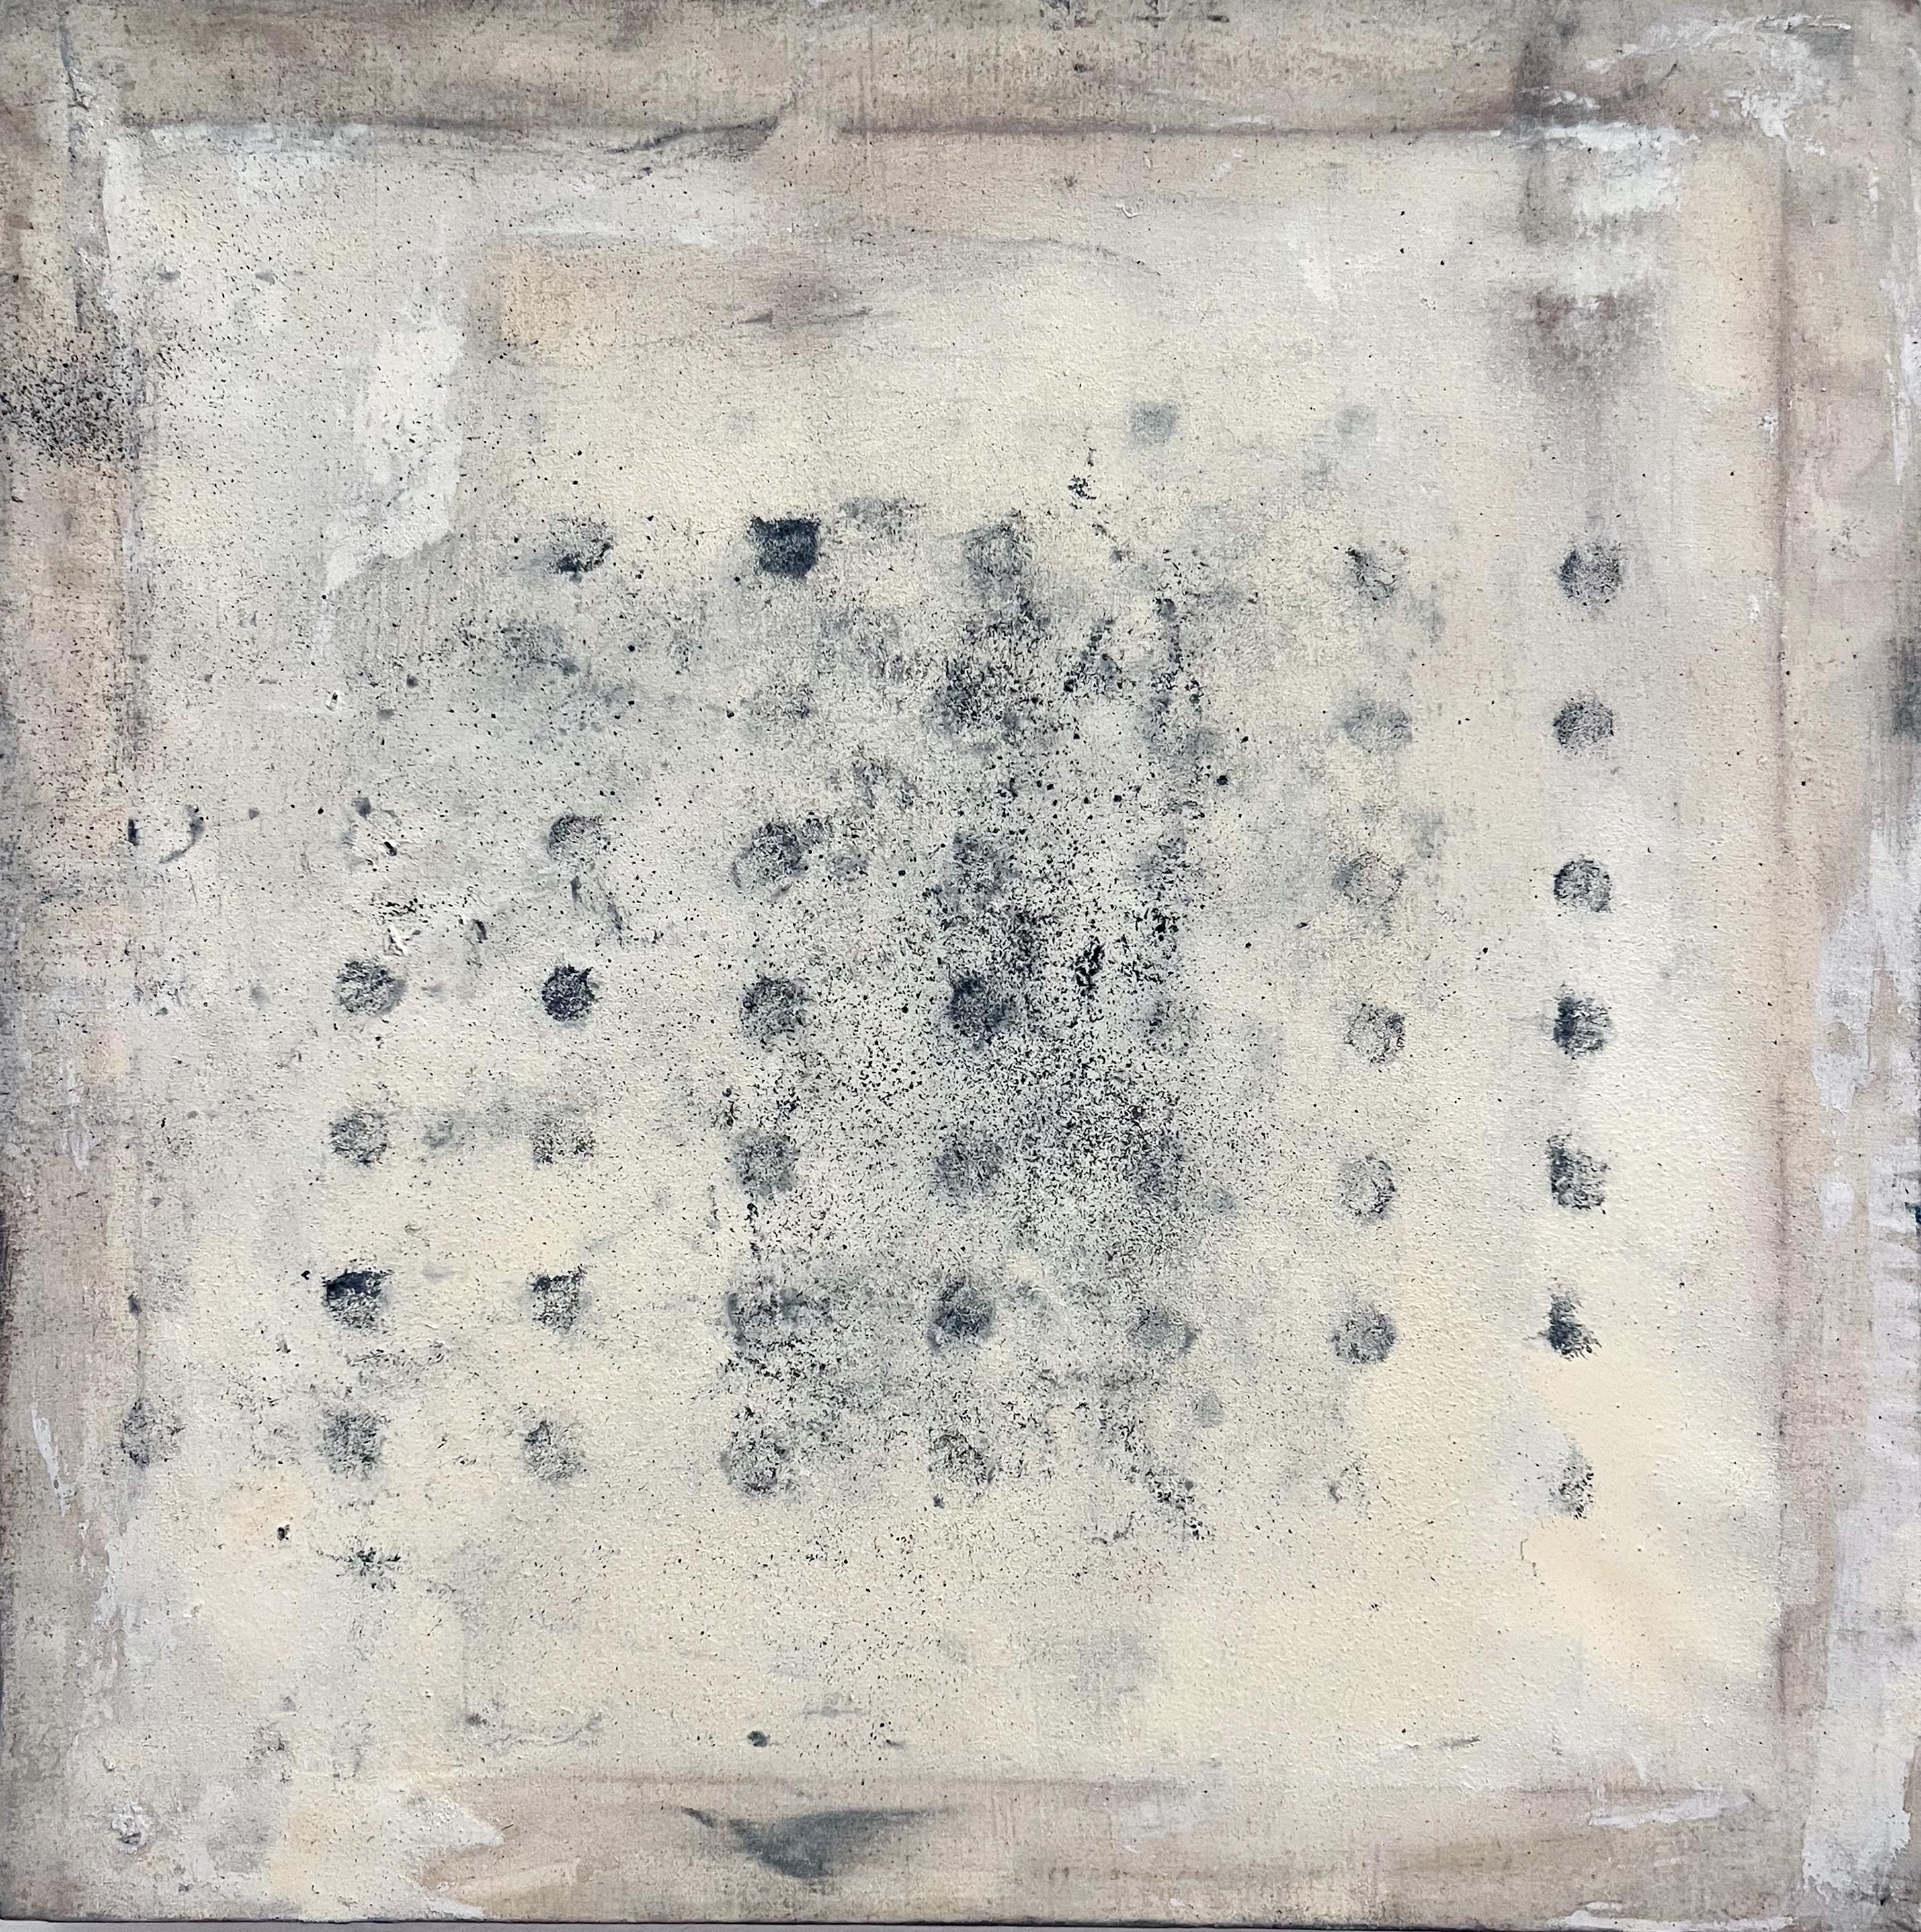 Traces 
mixed media on canvas 
40x40 cm
2017


Marilina Marchica, born in Agrigento, where she works and lives,
she graduated in Painting at the Academy of Fine Arts in Bologna in 2008.
Her research is oriented towards a reflection on the theme of